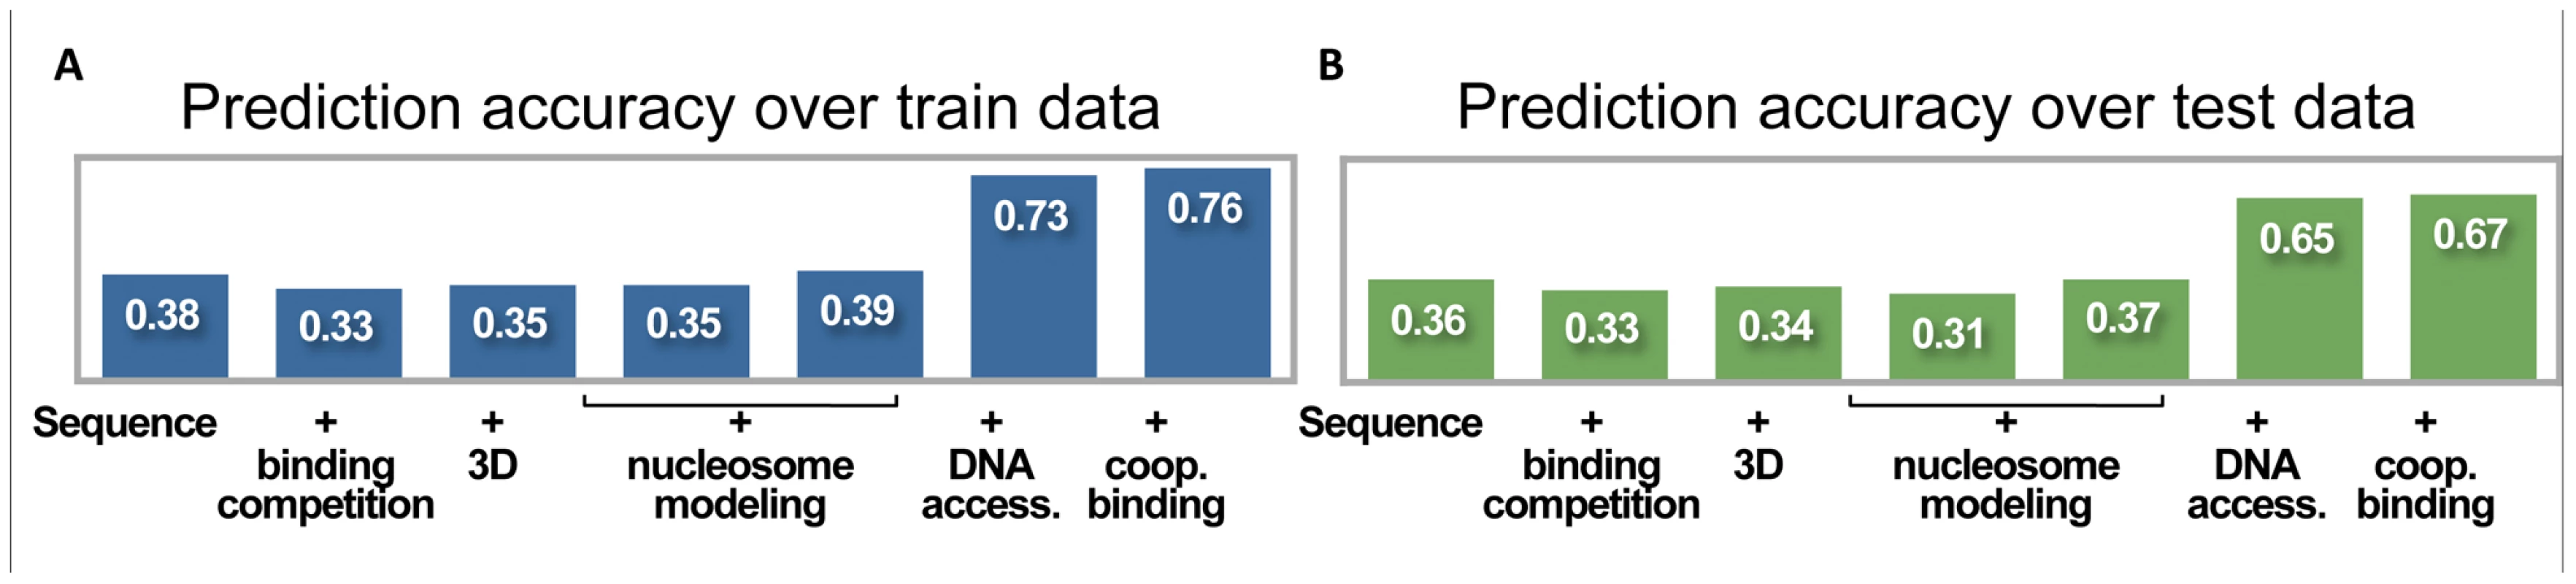 Prediction accuracy at increasing degrees of model complexity.